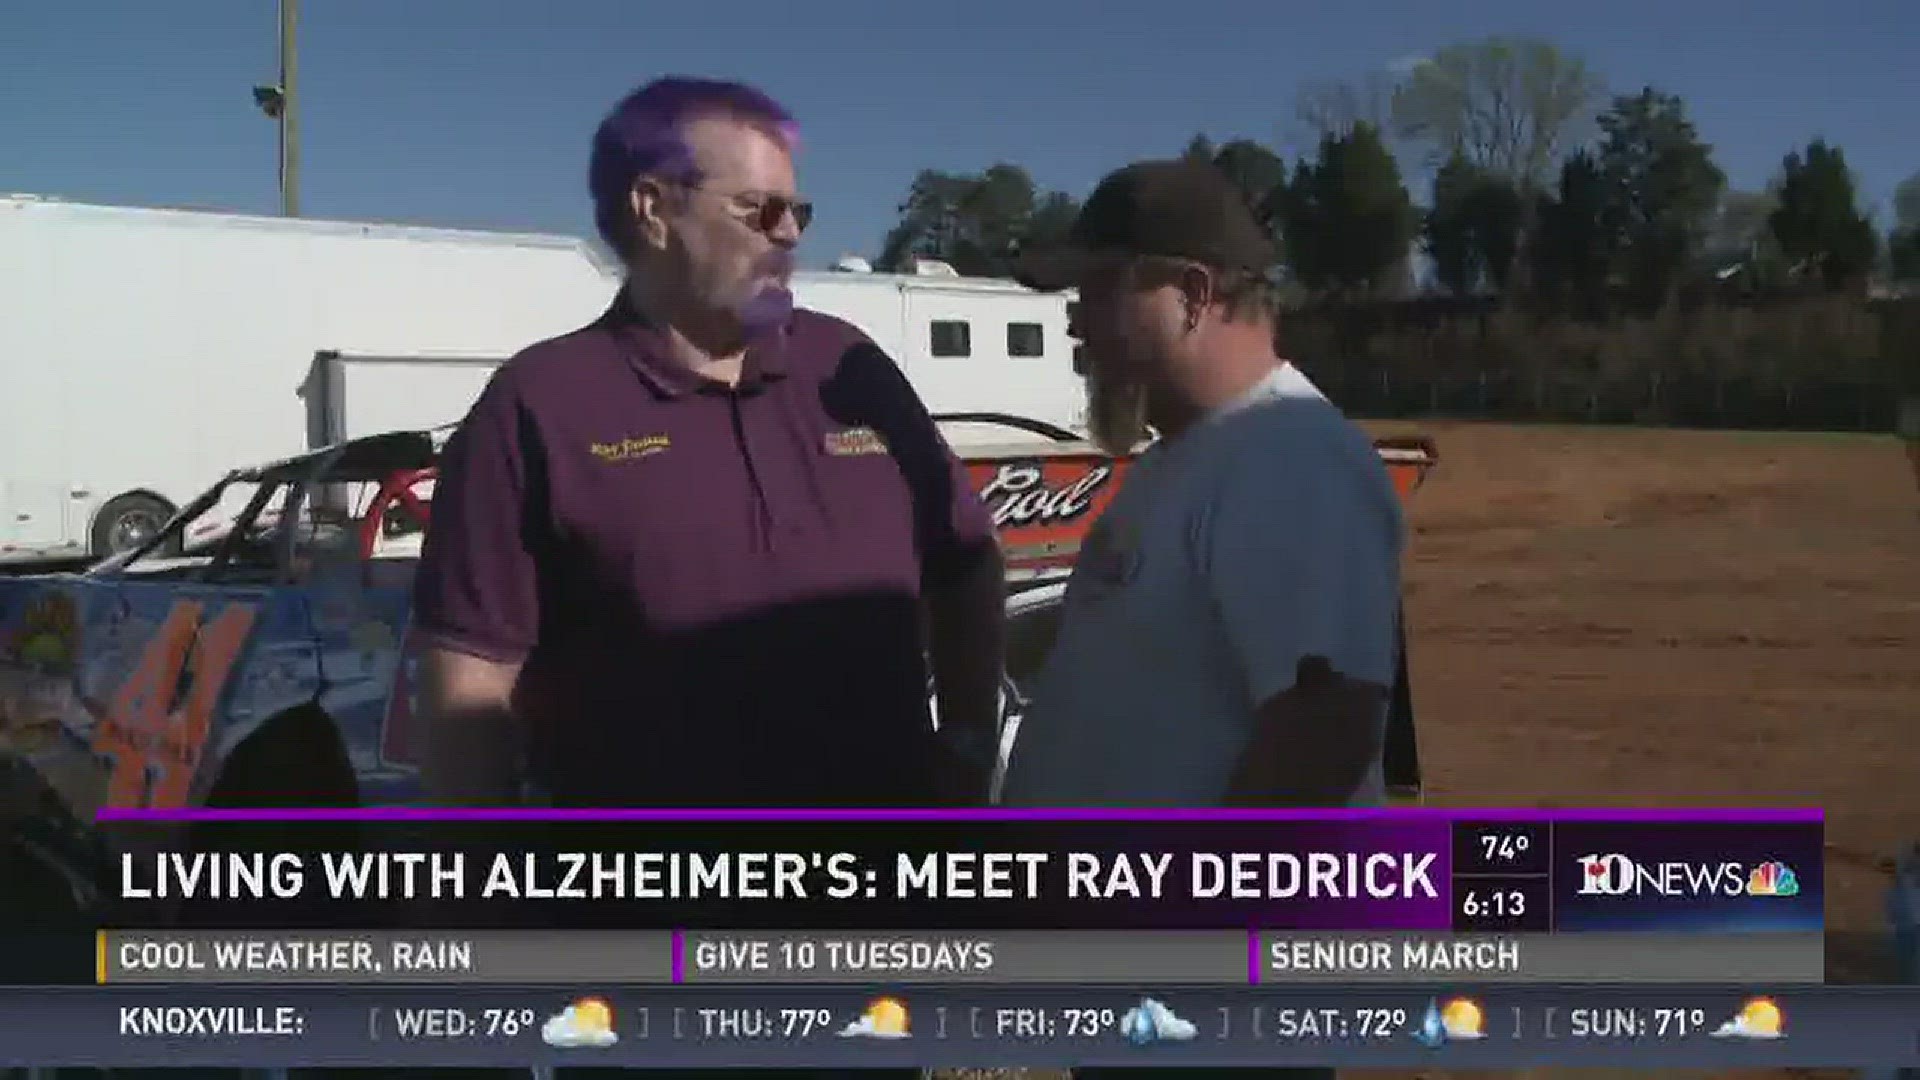 Ray Dedrick is living with Alzheimer's disease and has agreed to let us capture what days are like for him and his family as they navigate this devastating diagnosis.